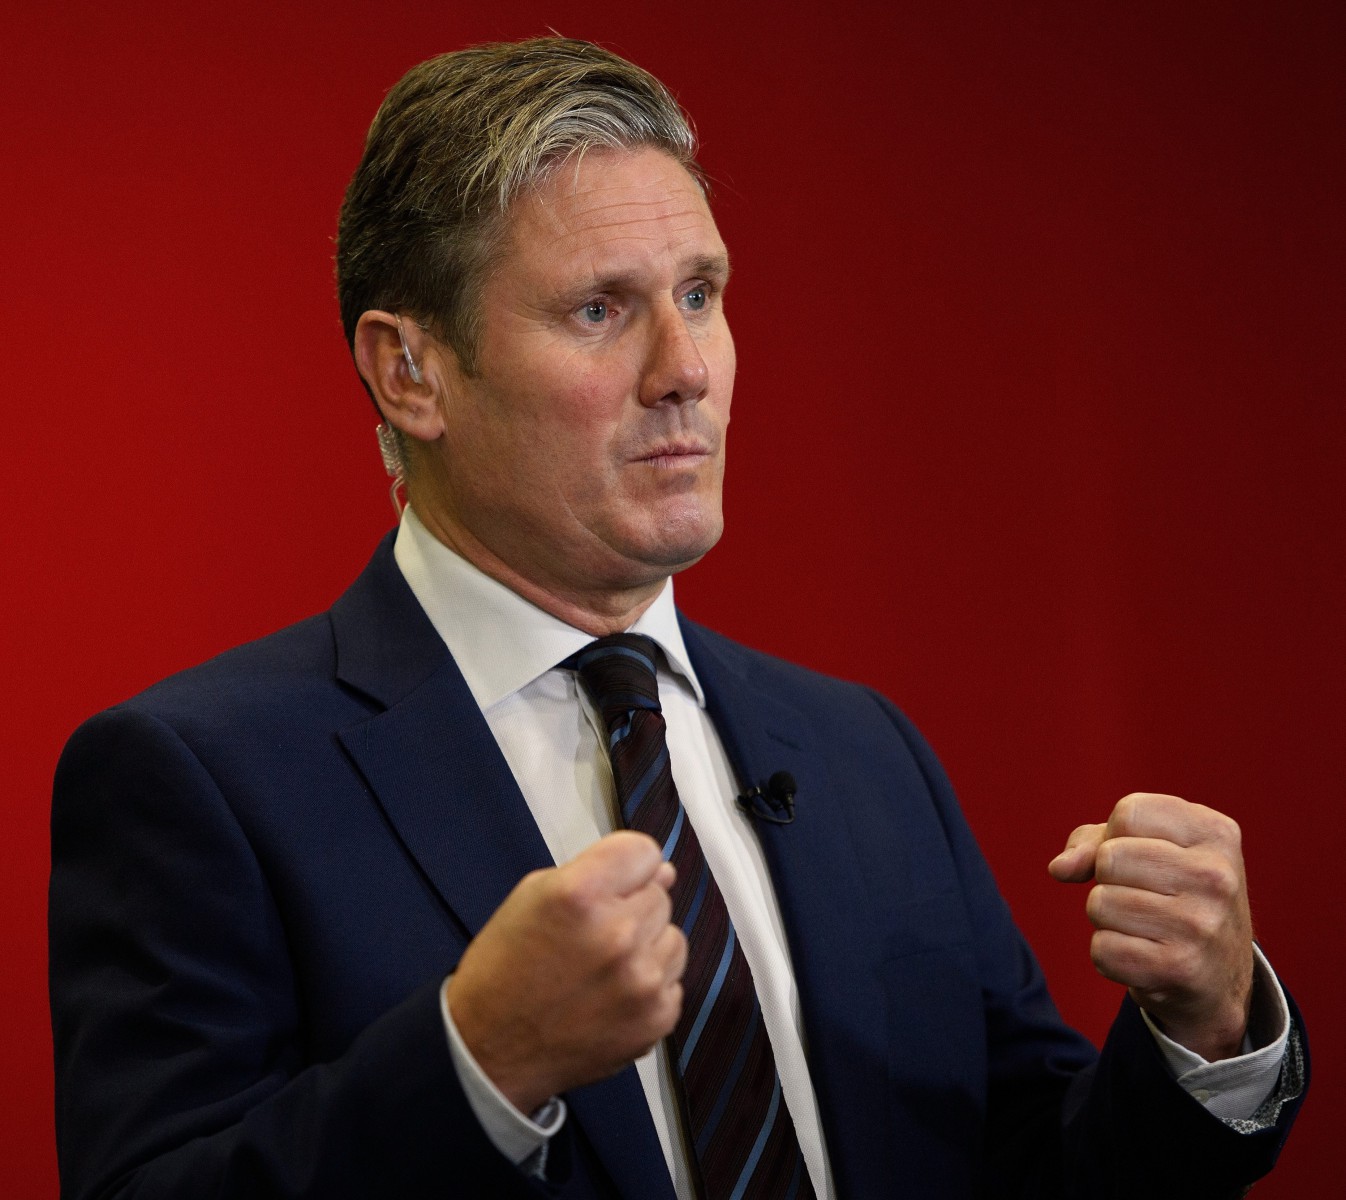 Sir Keir Starmer wants freedom of movement for EU citizens to be part of Brexit negotiations